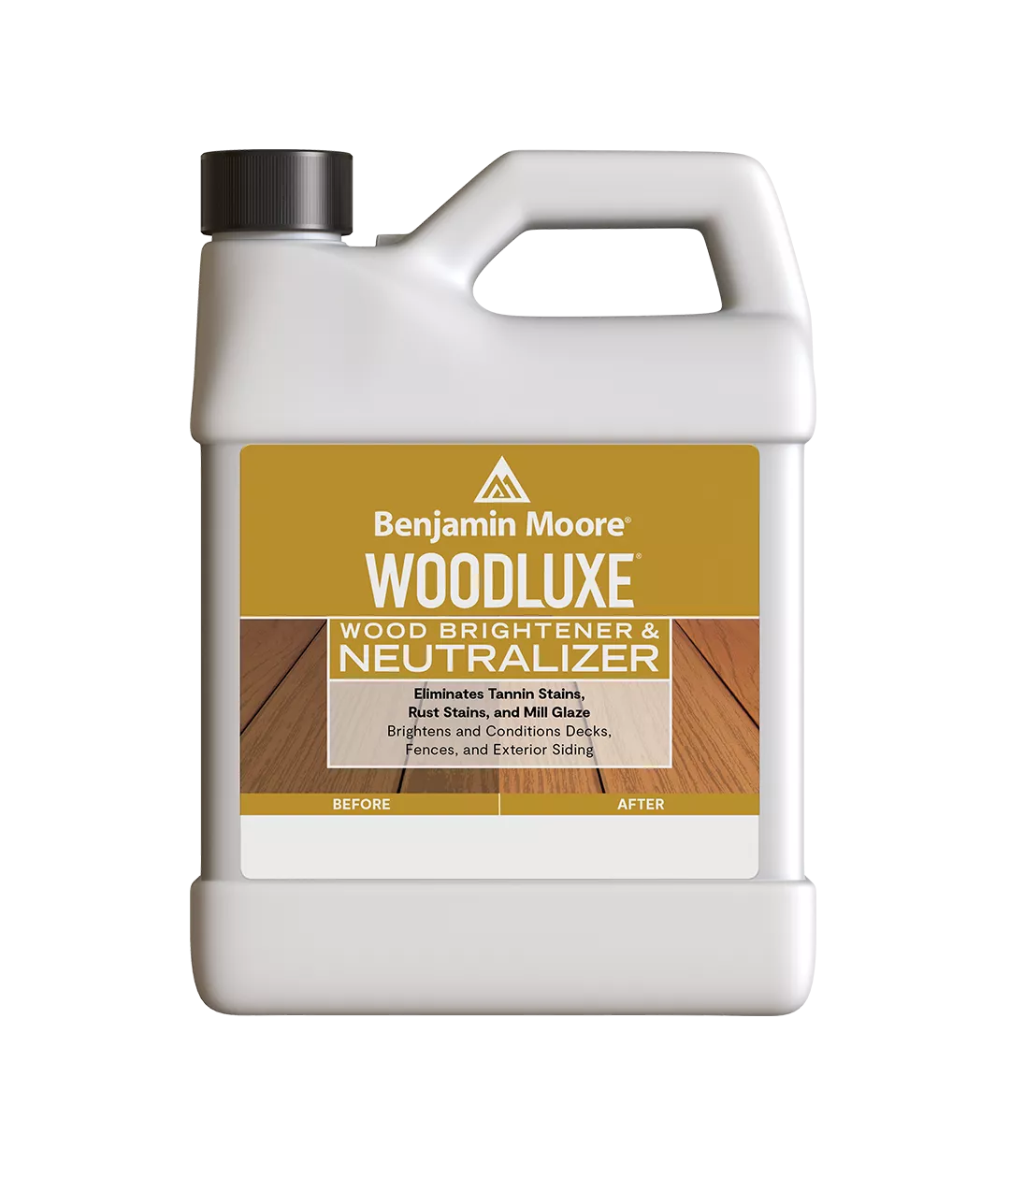 Benjamin Moore Woodluxe Wood Brightener & Neutralizer Gallon available at Catalina Paints in Los Angeles County.